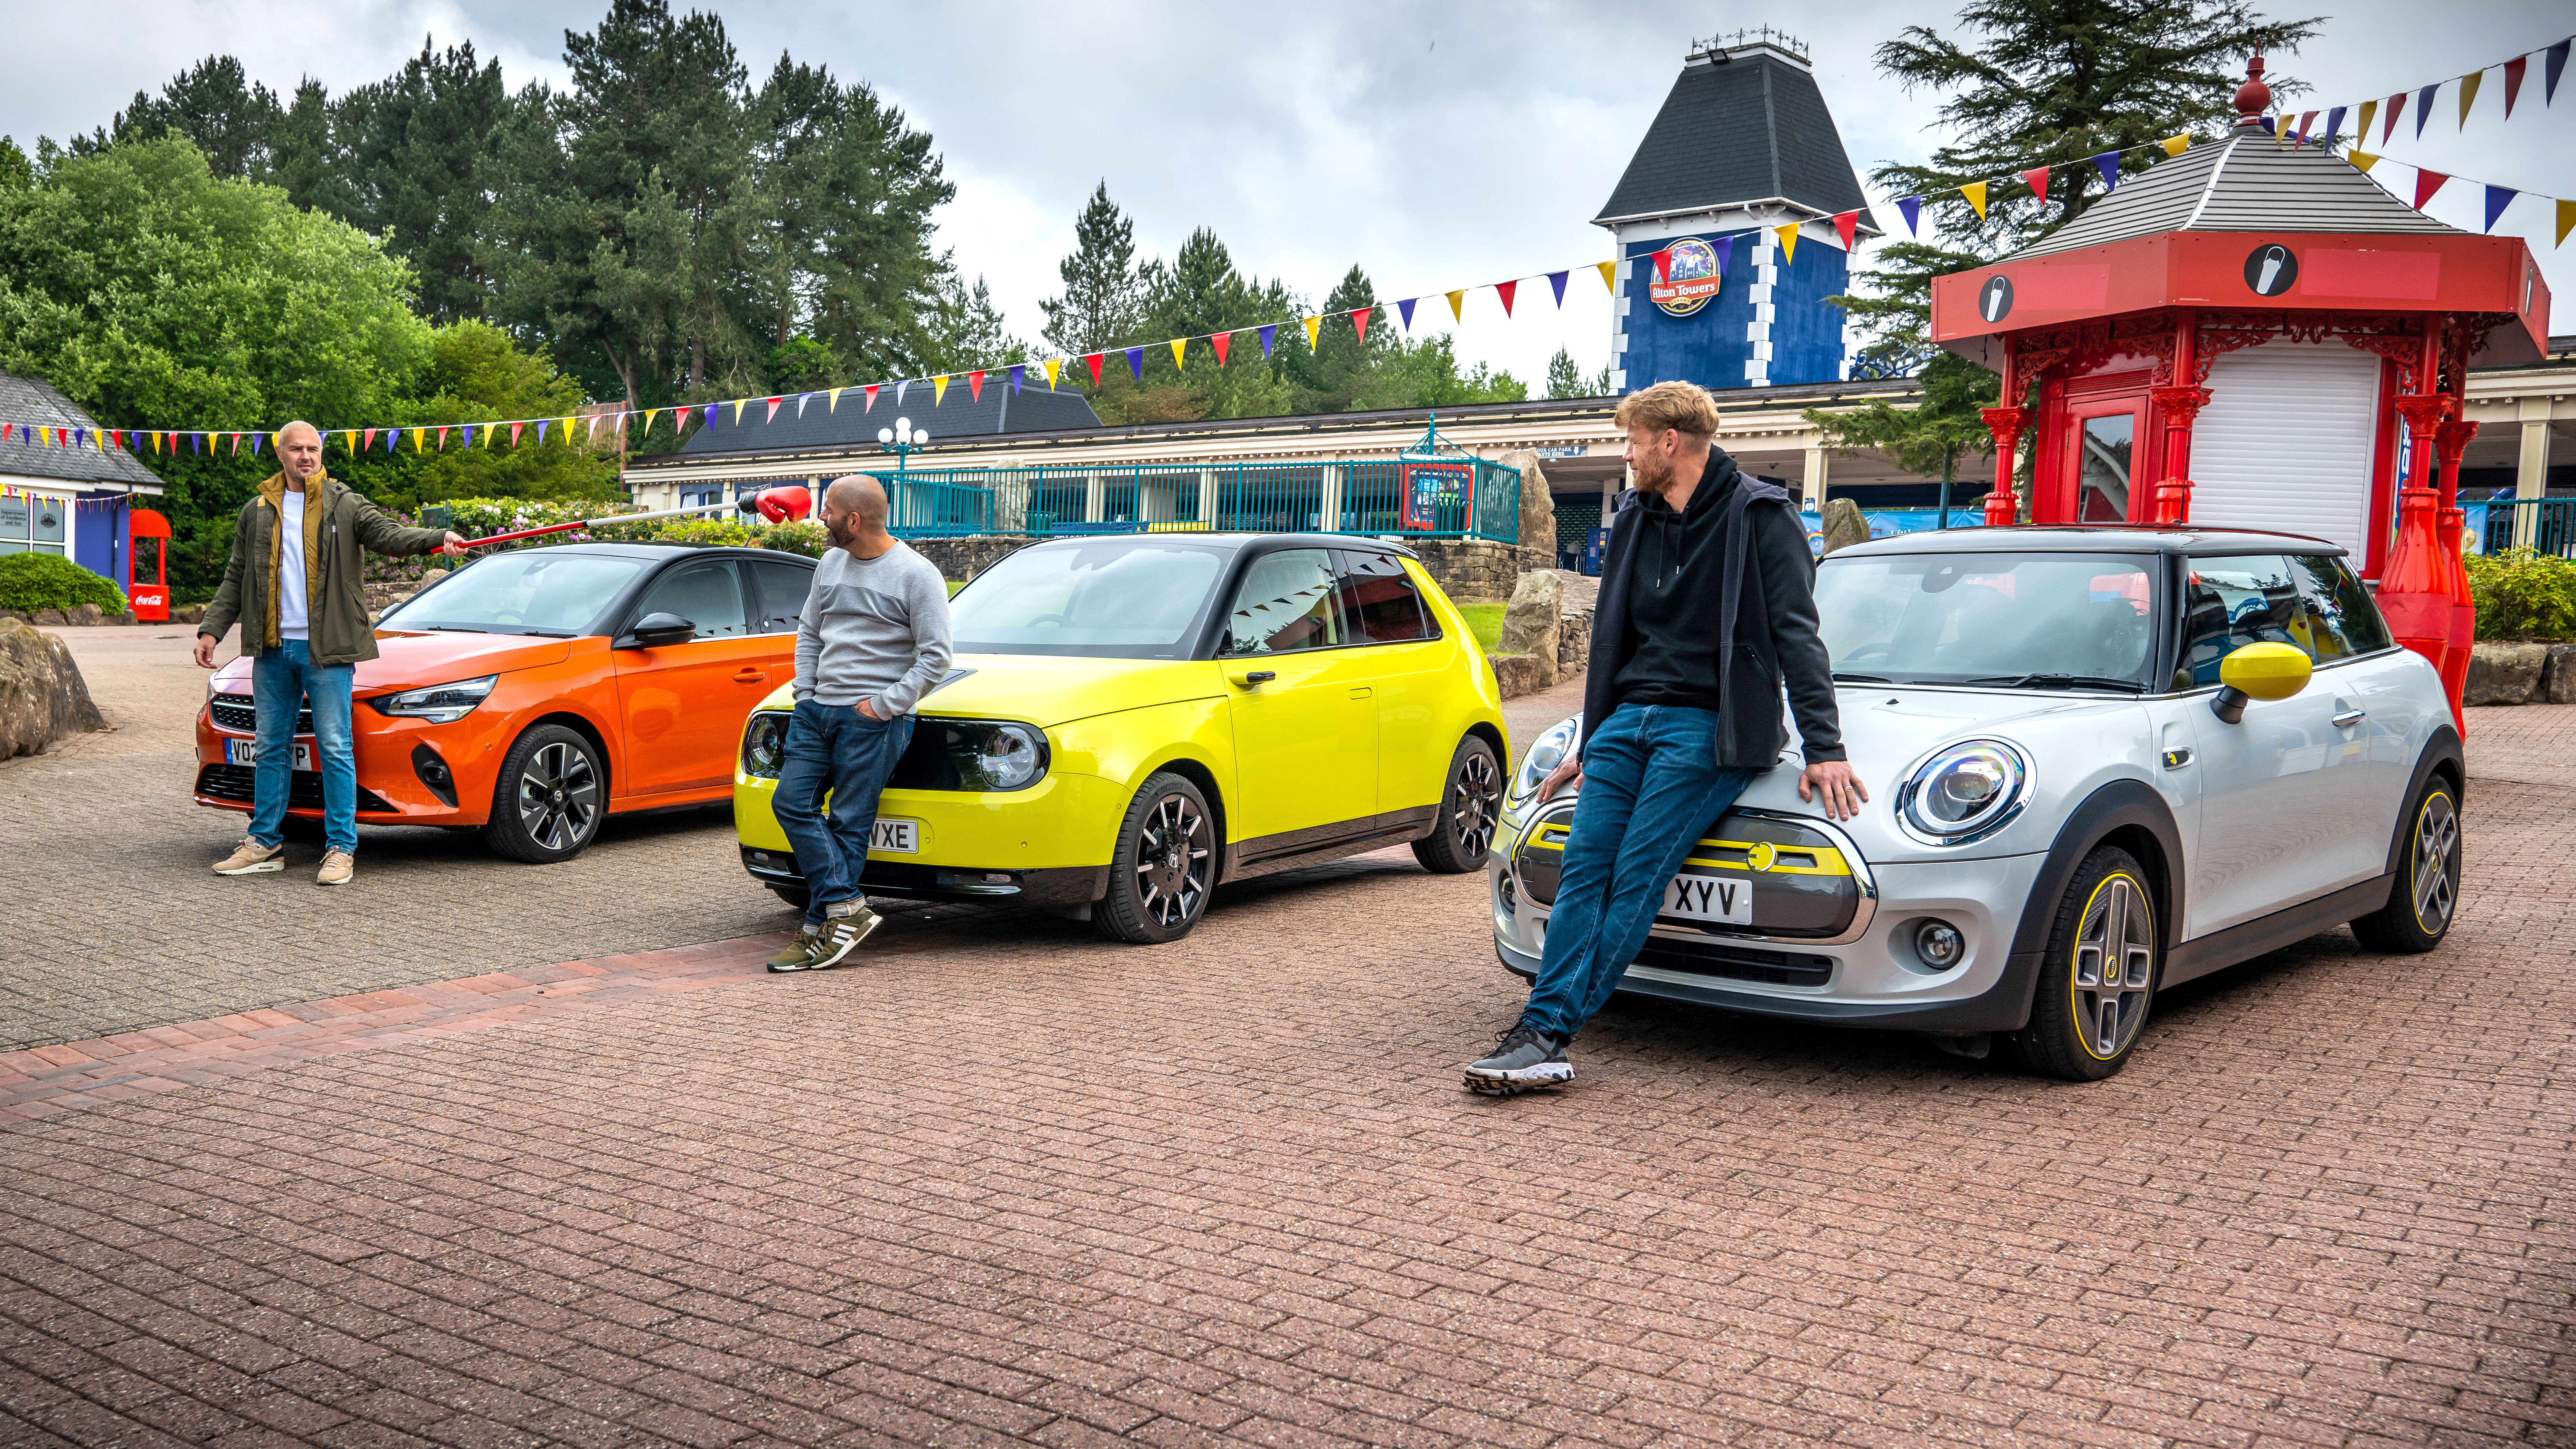 Alton Towers Becomes Top Gear Race Track